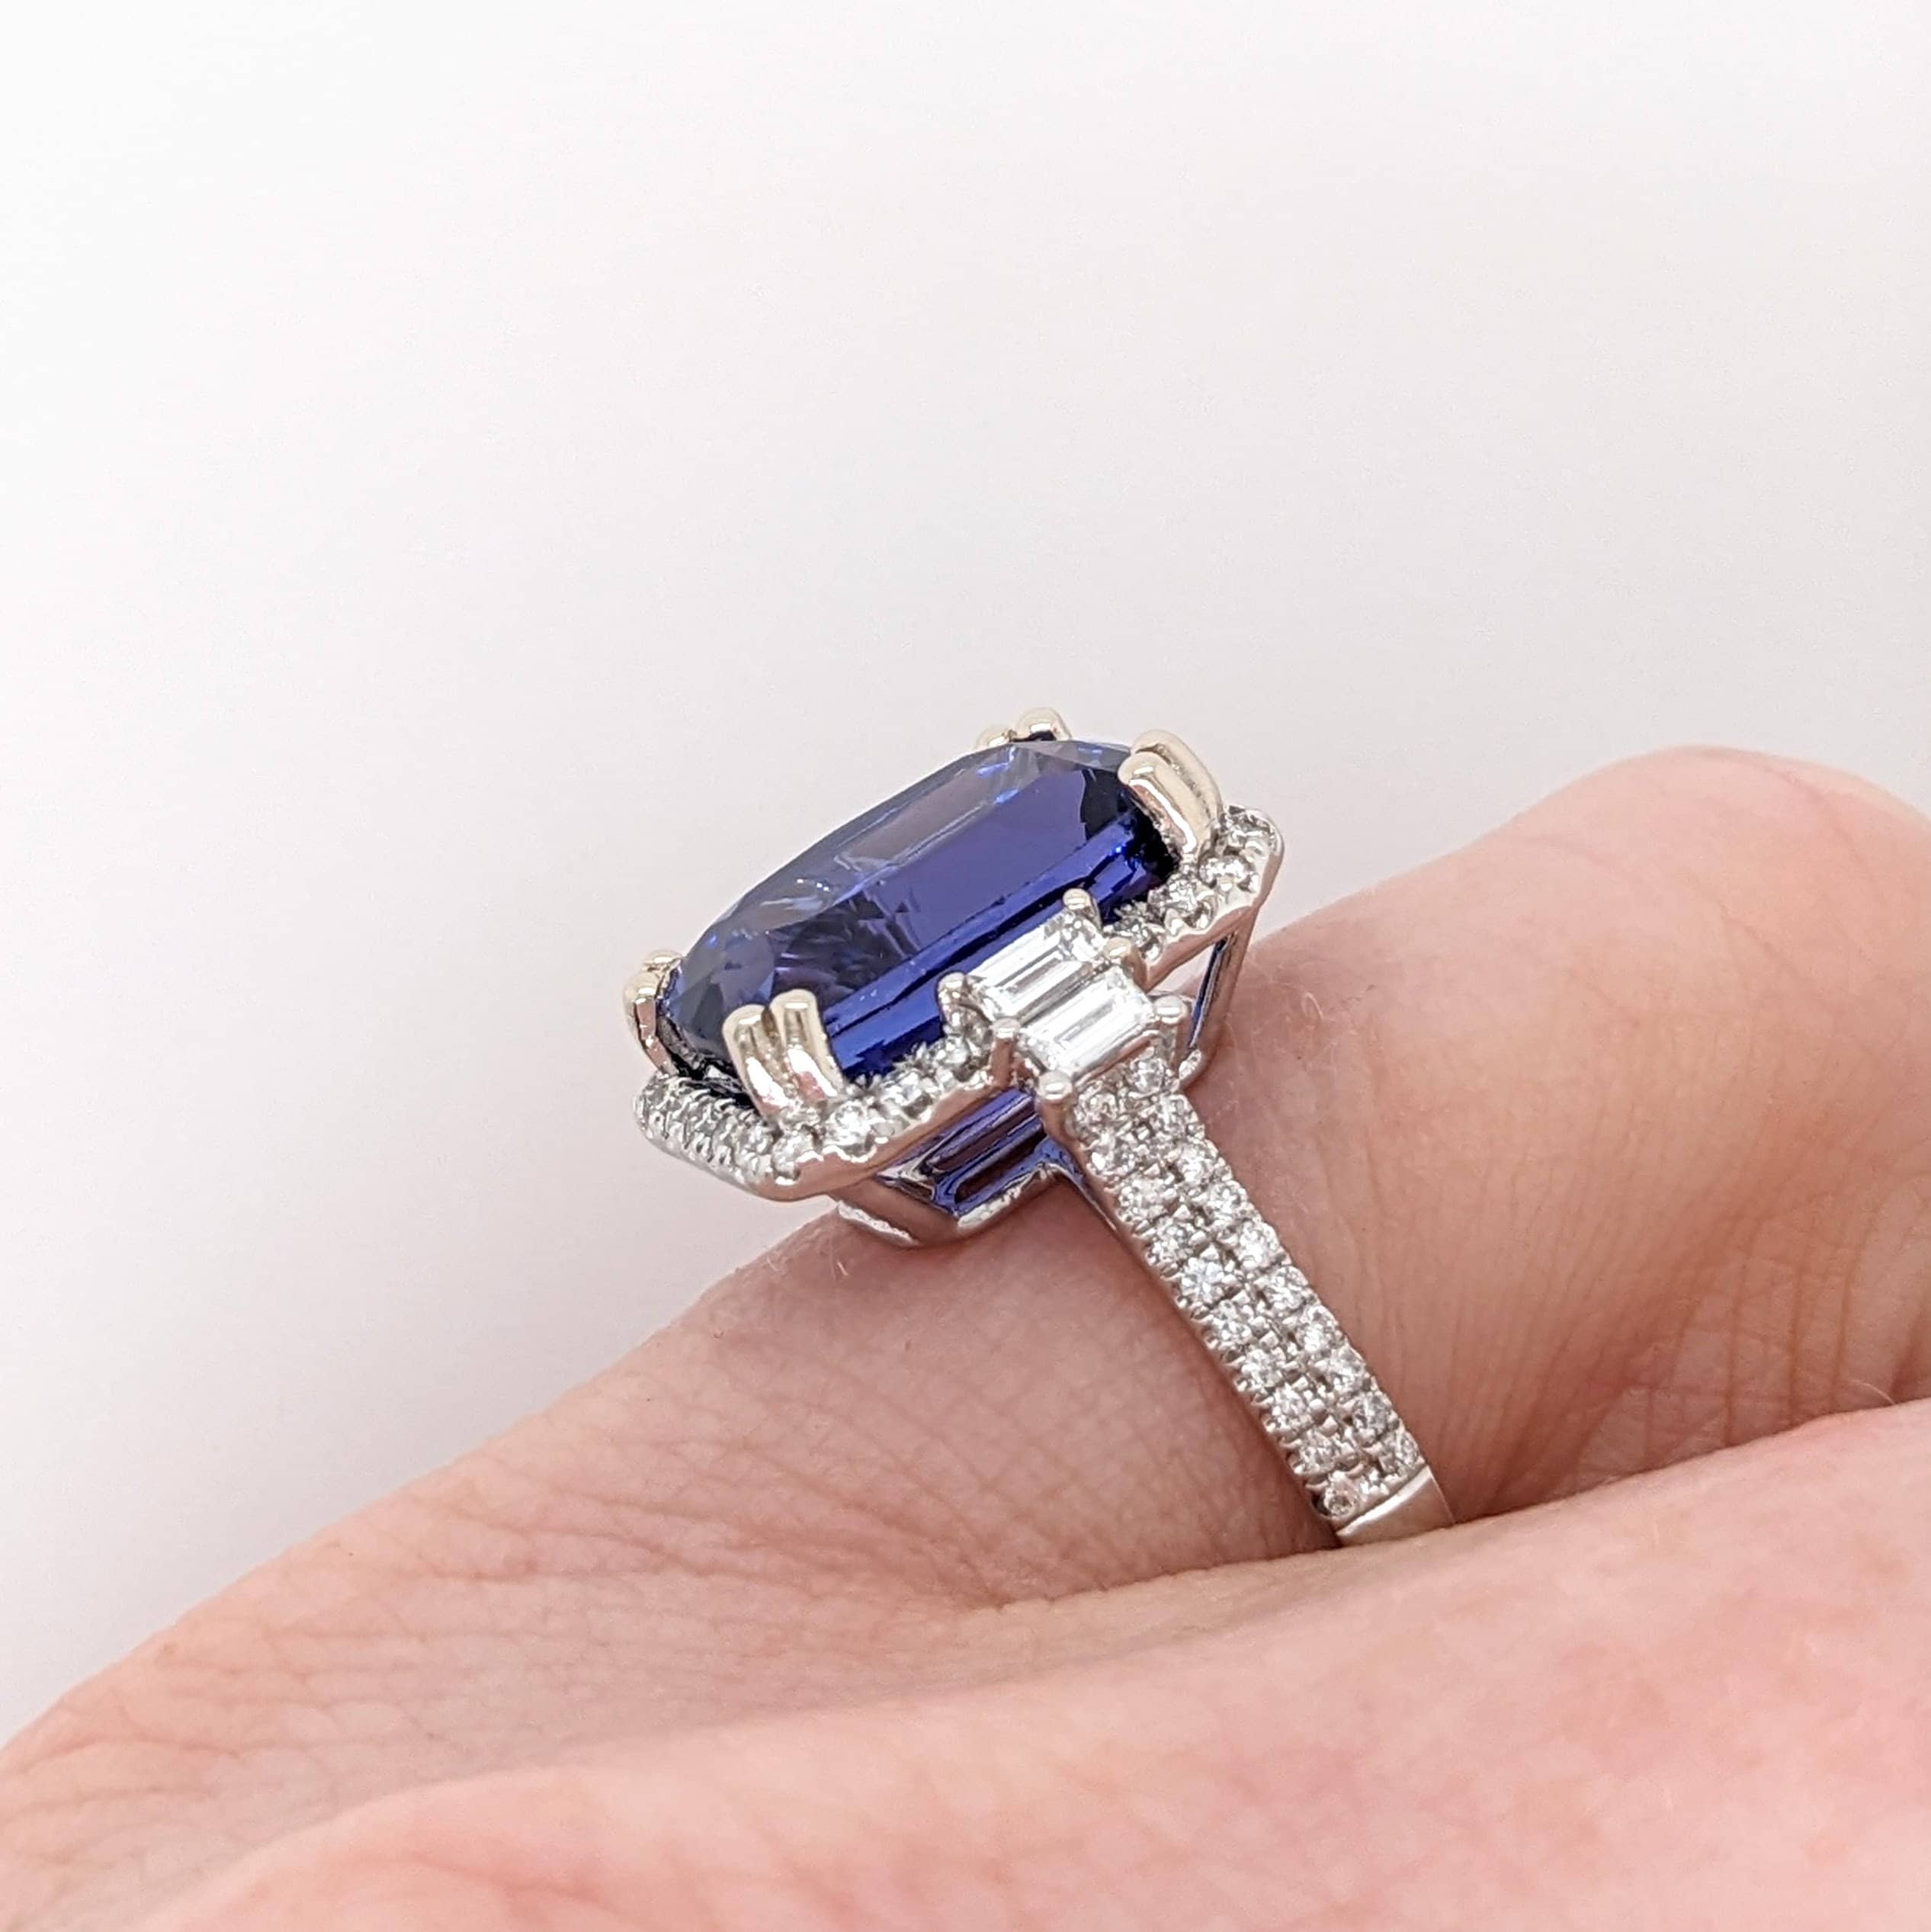 Statement Rings-6.5carat Tanzanite AAAA color in 14k Solid White Gold w Natural Diamonds || Cushion Cut 12x8mm || December Birthstone || Customizable || - NNJGemstones